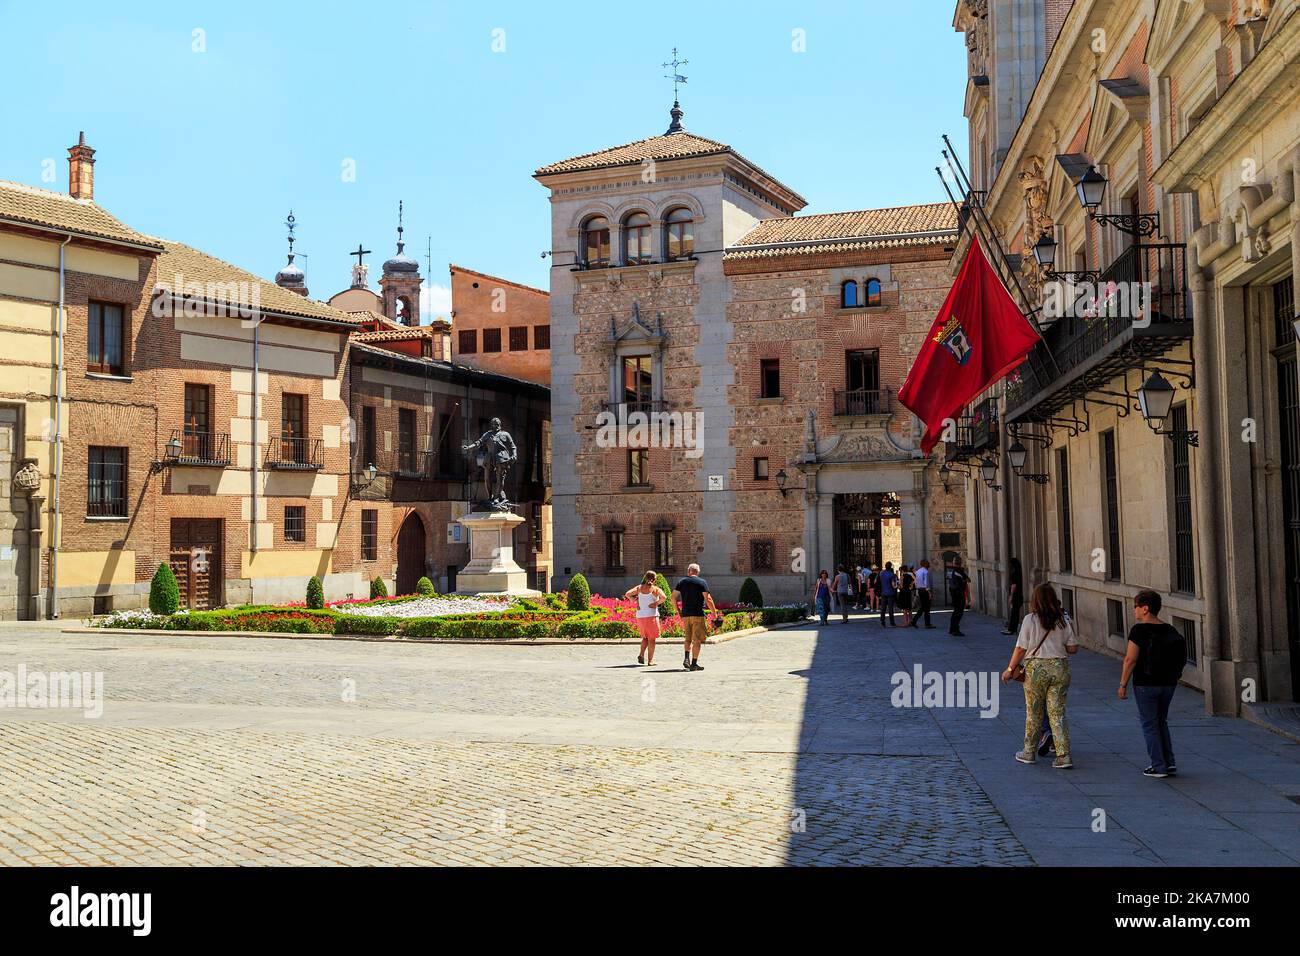 MADRID, SPAIN - MAY 24, 2017: Plaza de la Villa is one of the best preserved medieval architectural ensembles of the city. Stock Photo